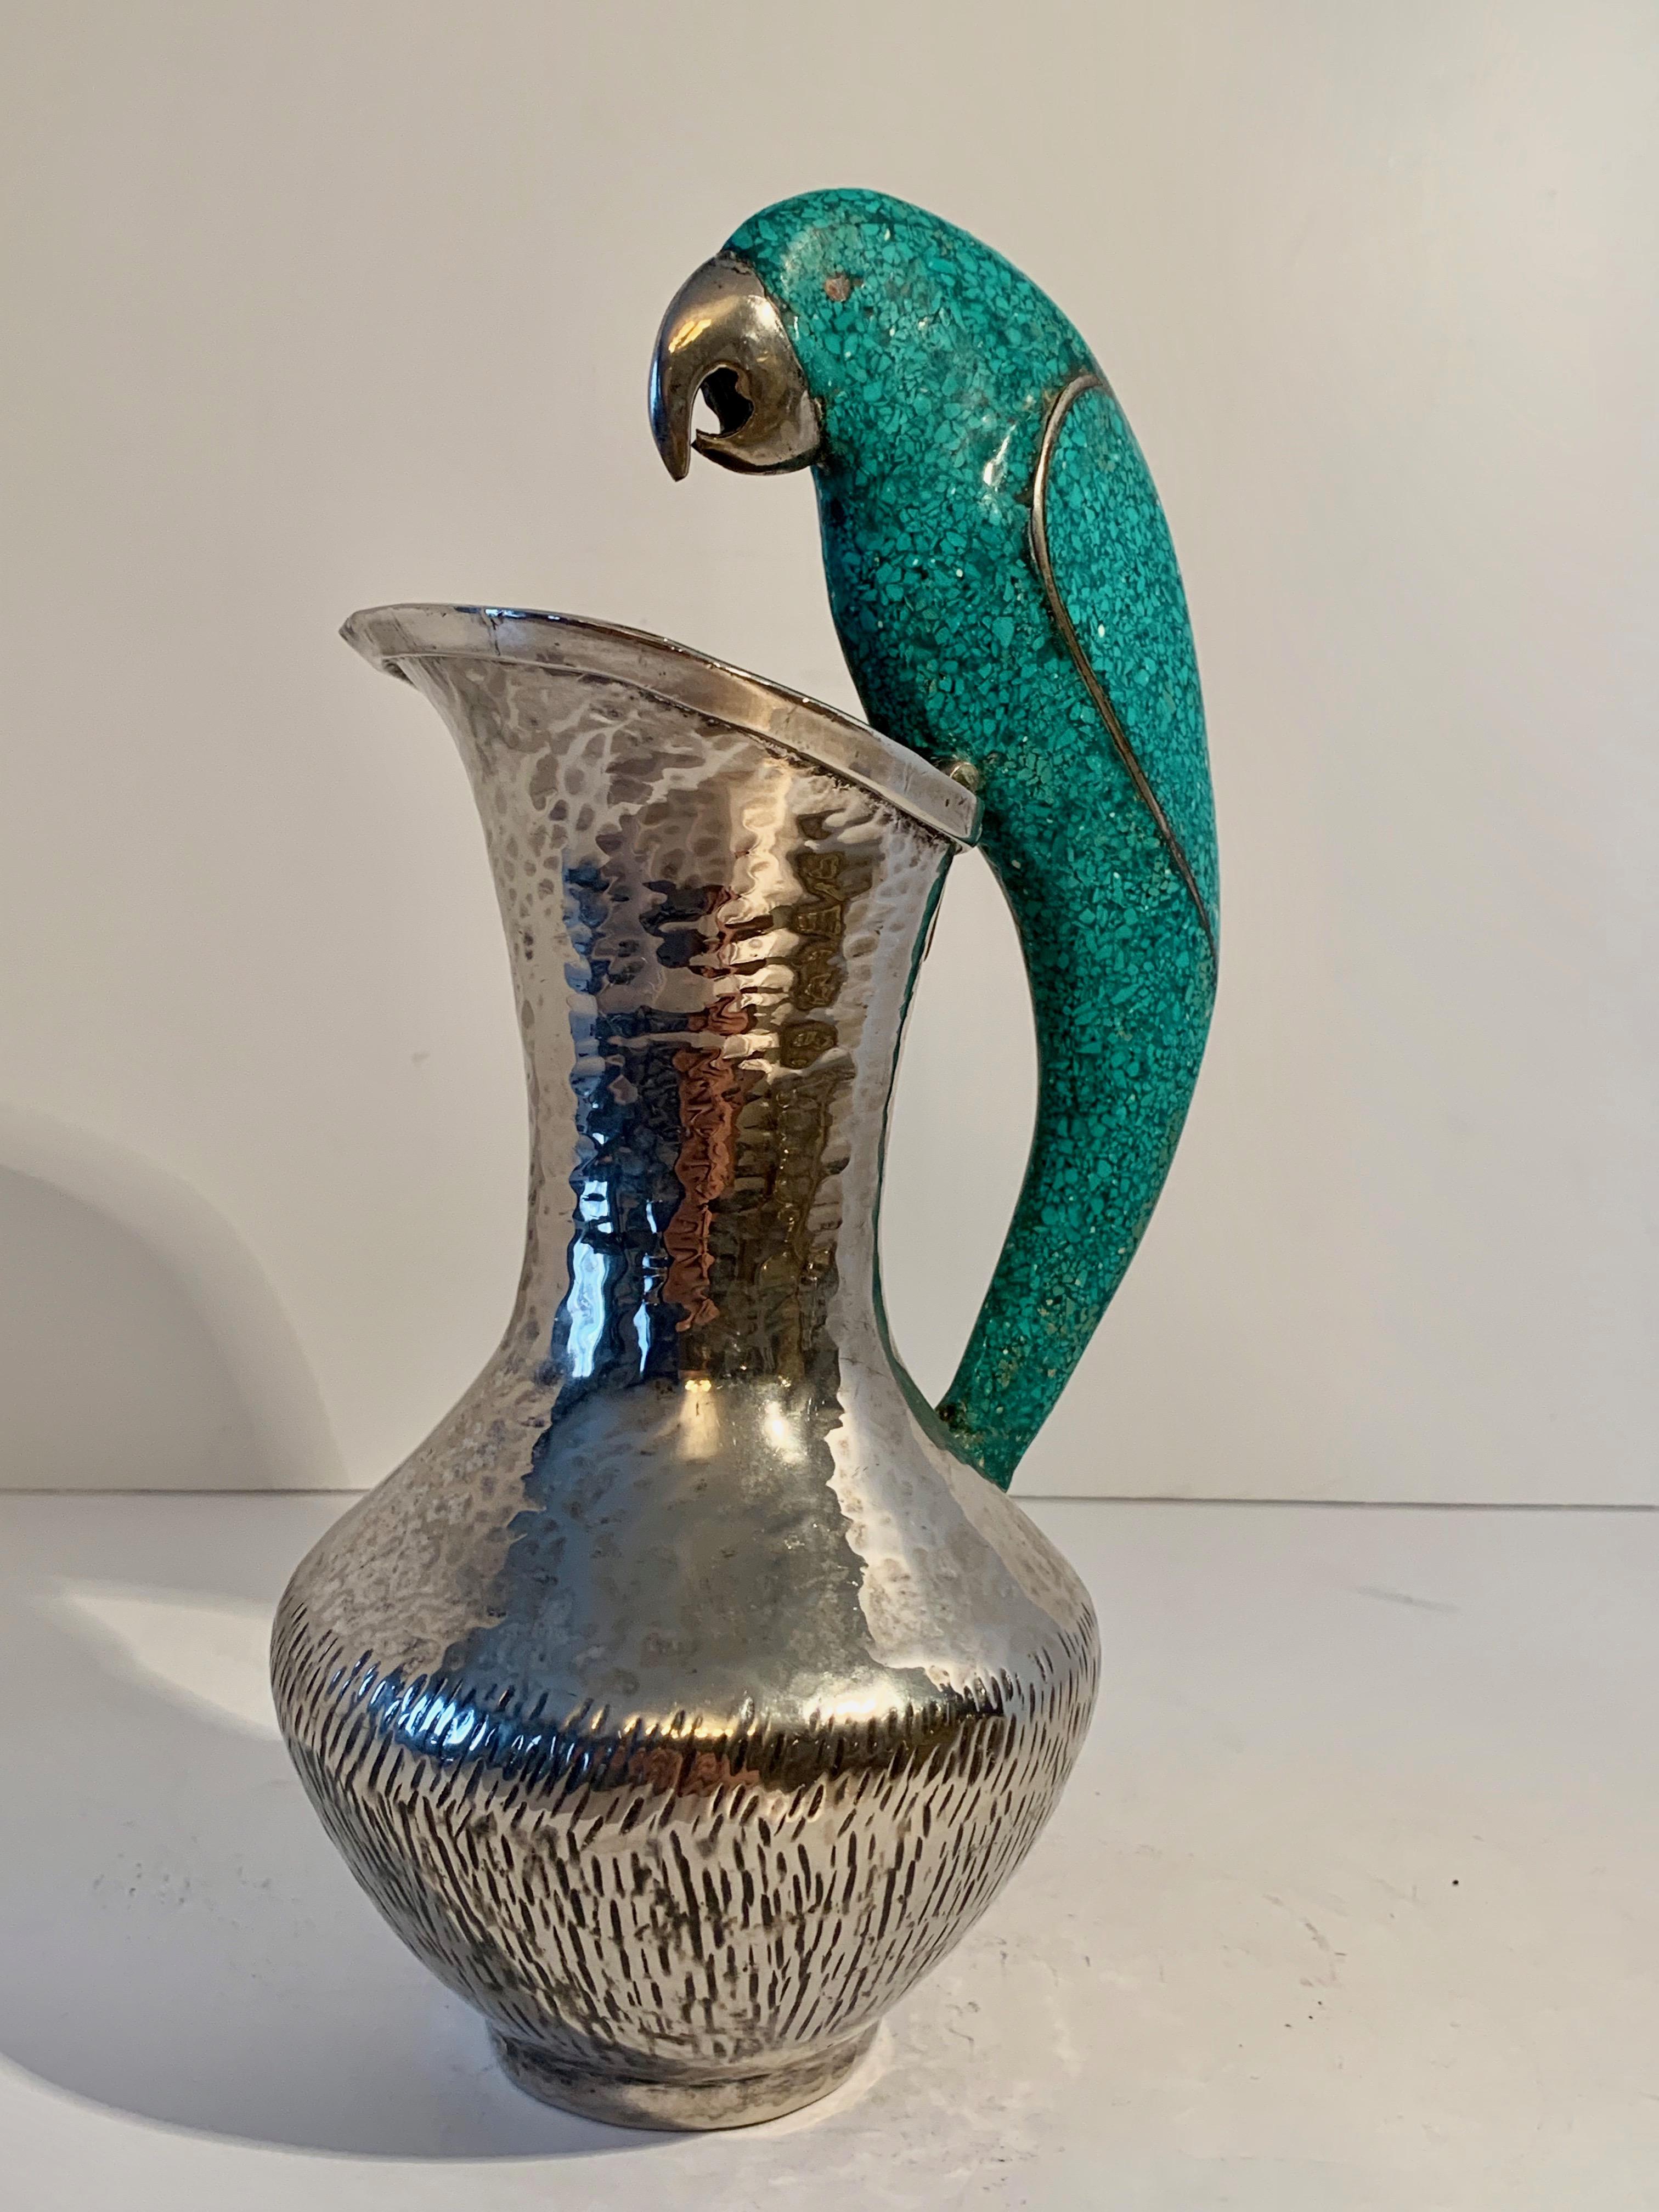 Los Castillo silver plate pitcher with parrot handle in turquoise. Useful as a pitcher, however, equally stunning as a decorative piece. For the Sophisticated bar, the parrot lover or to water your plants! From Mexico by Taxco of Mexico.